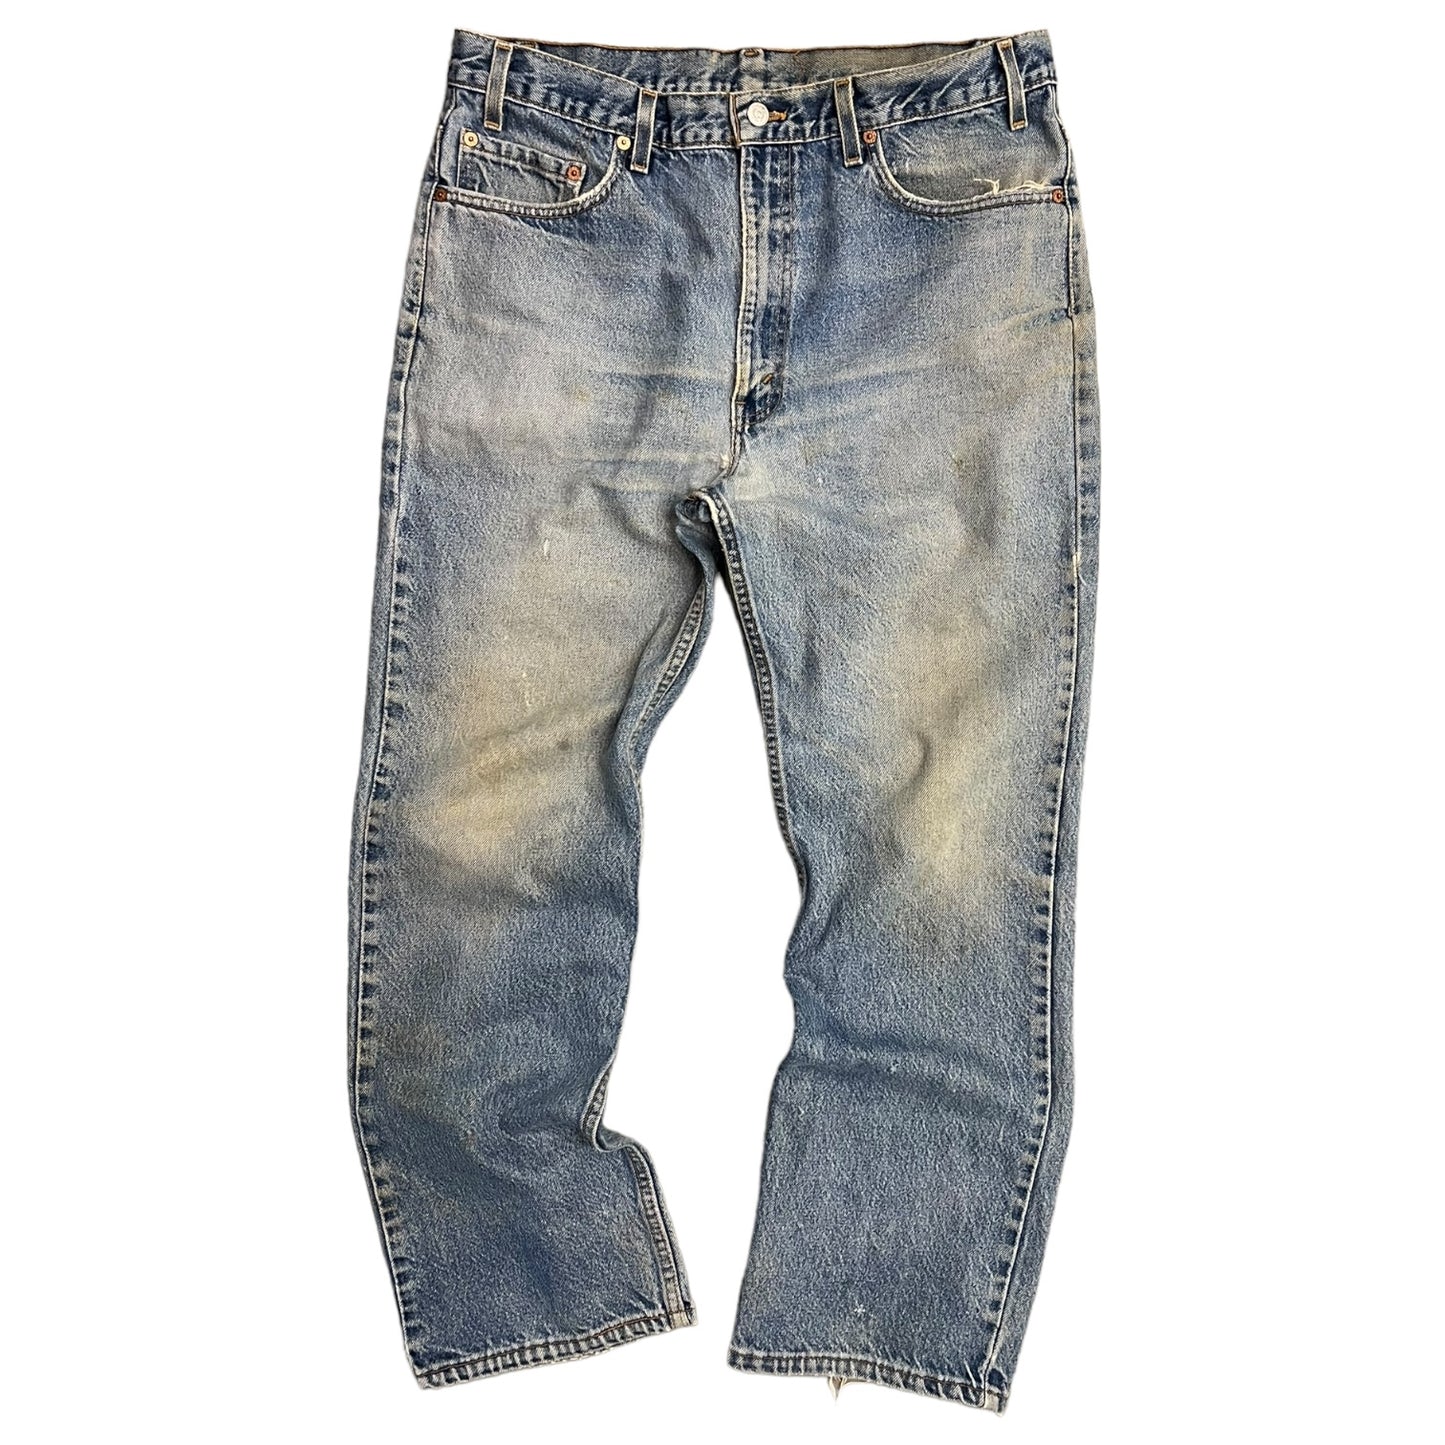 90s Levi’s 517 Boot Cut Distressed Jeans